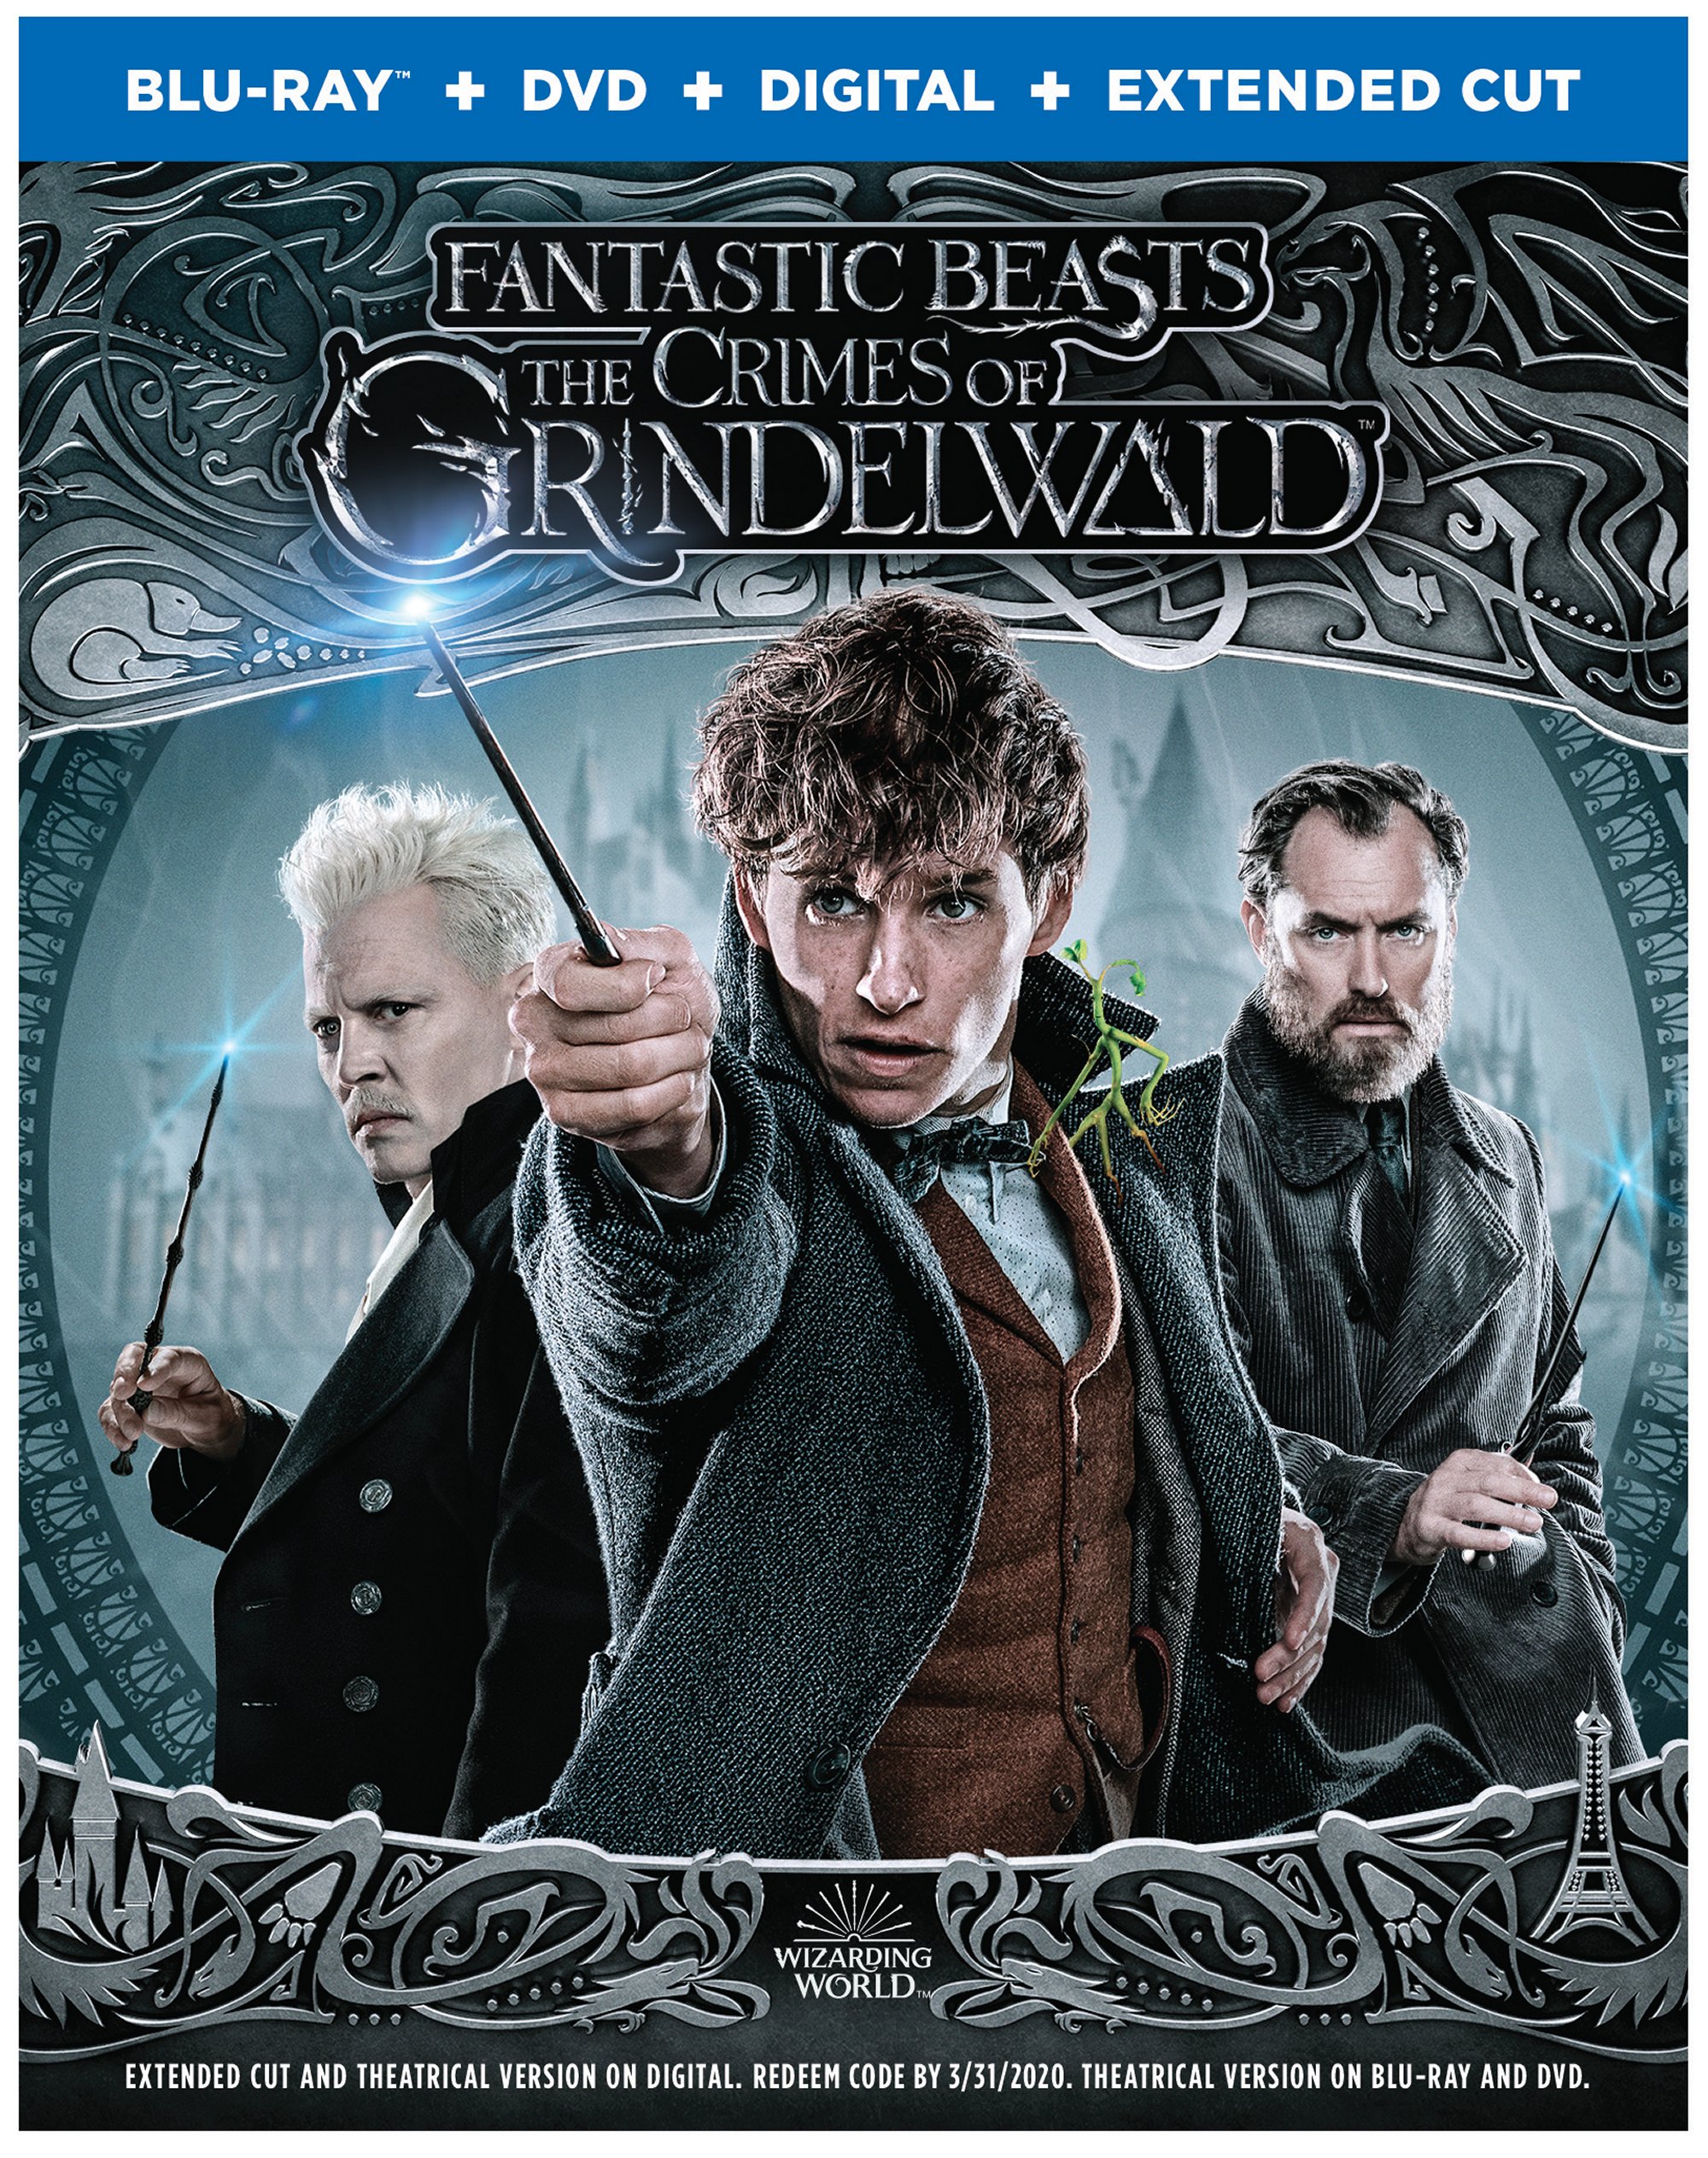 Fantastic Beasts: The Crimes Of Grindelwald Blu-Ray Combo Pack cover (Warner Bros. Home Entertainment)